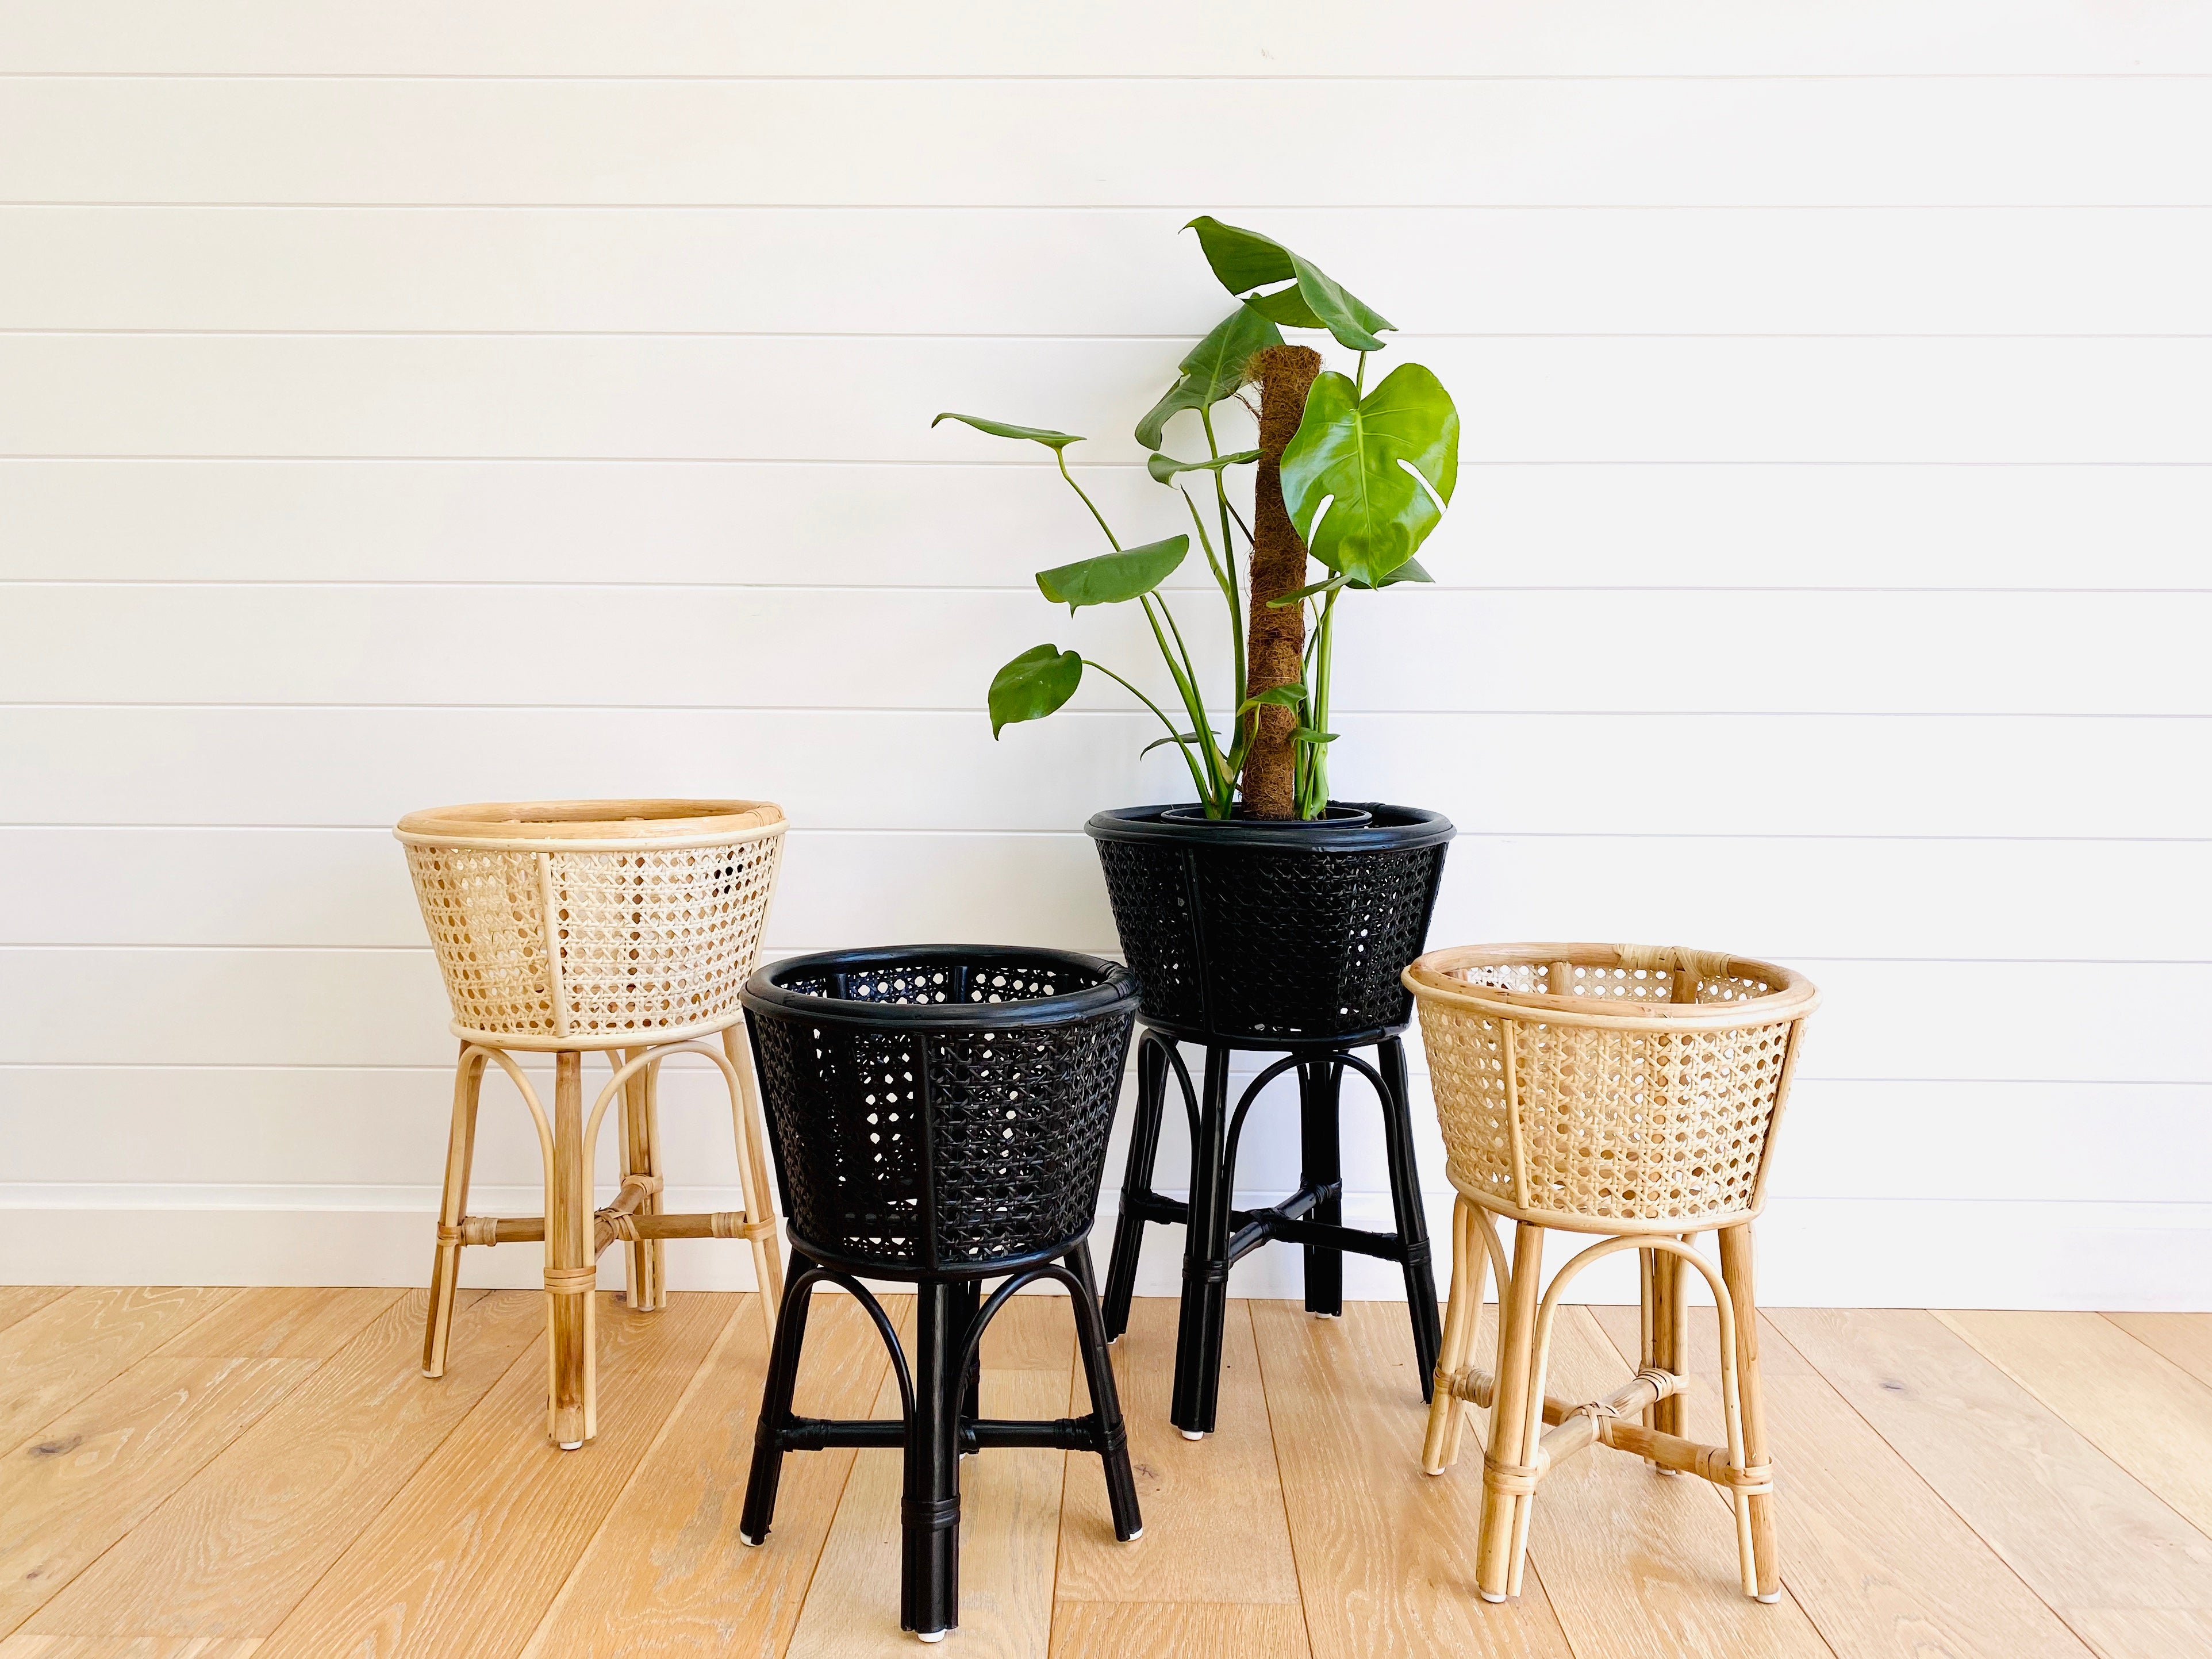 The Avoca plant stand